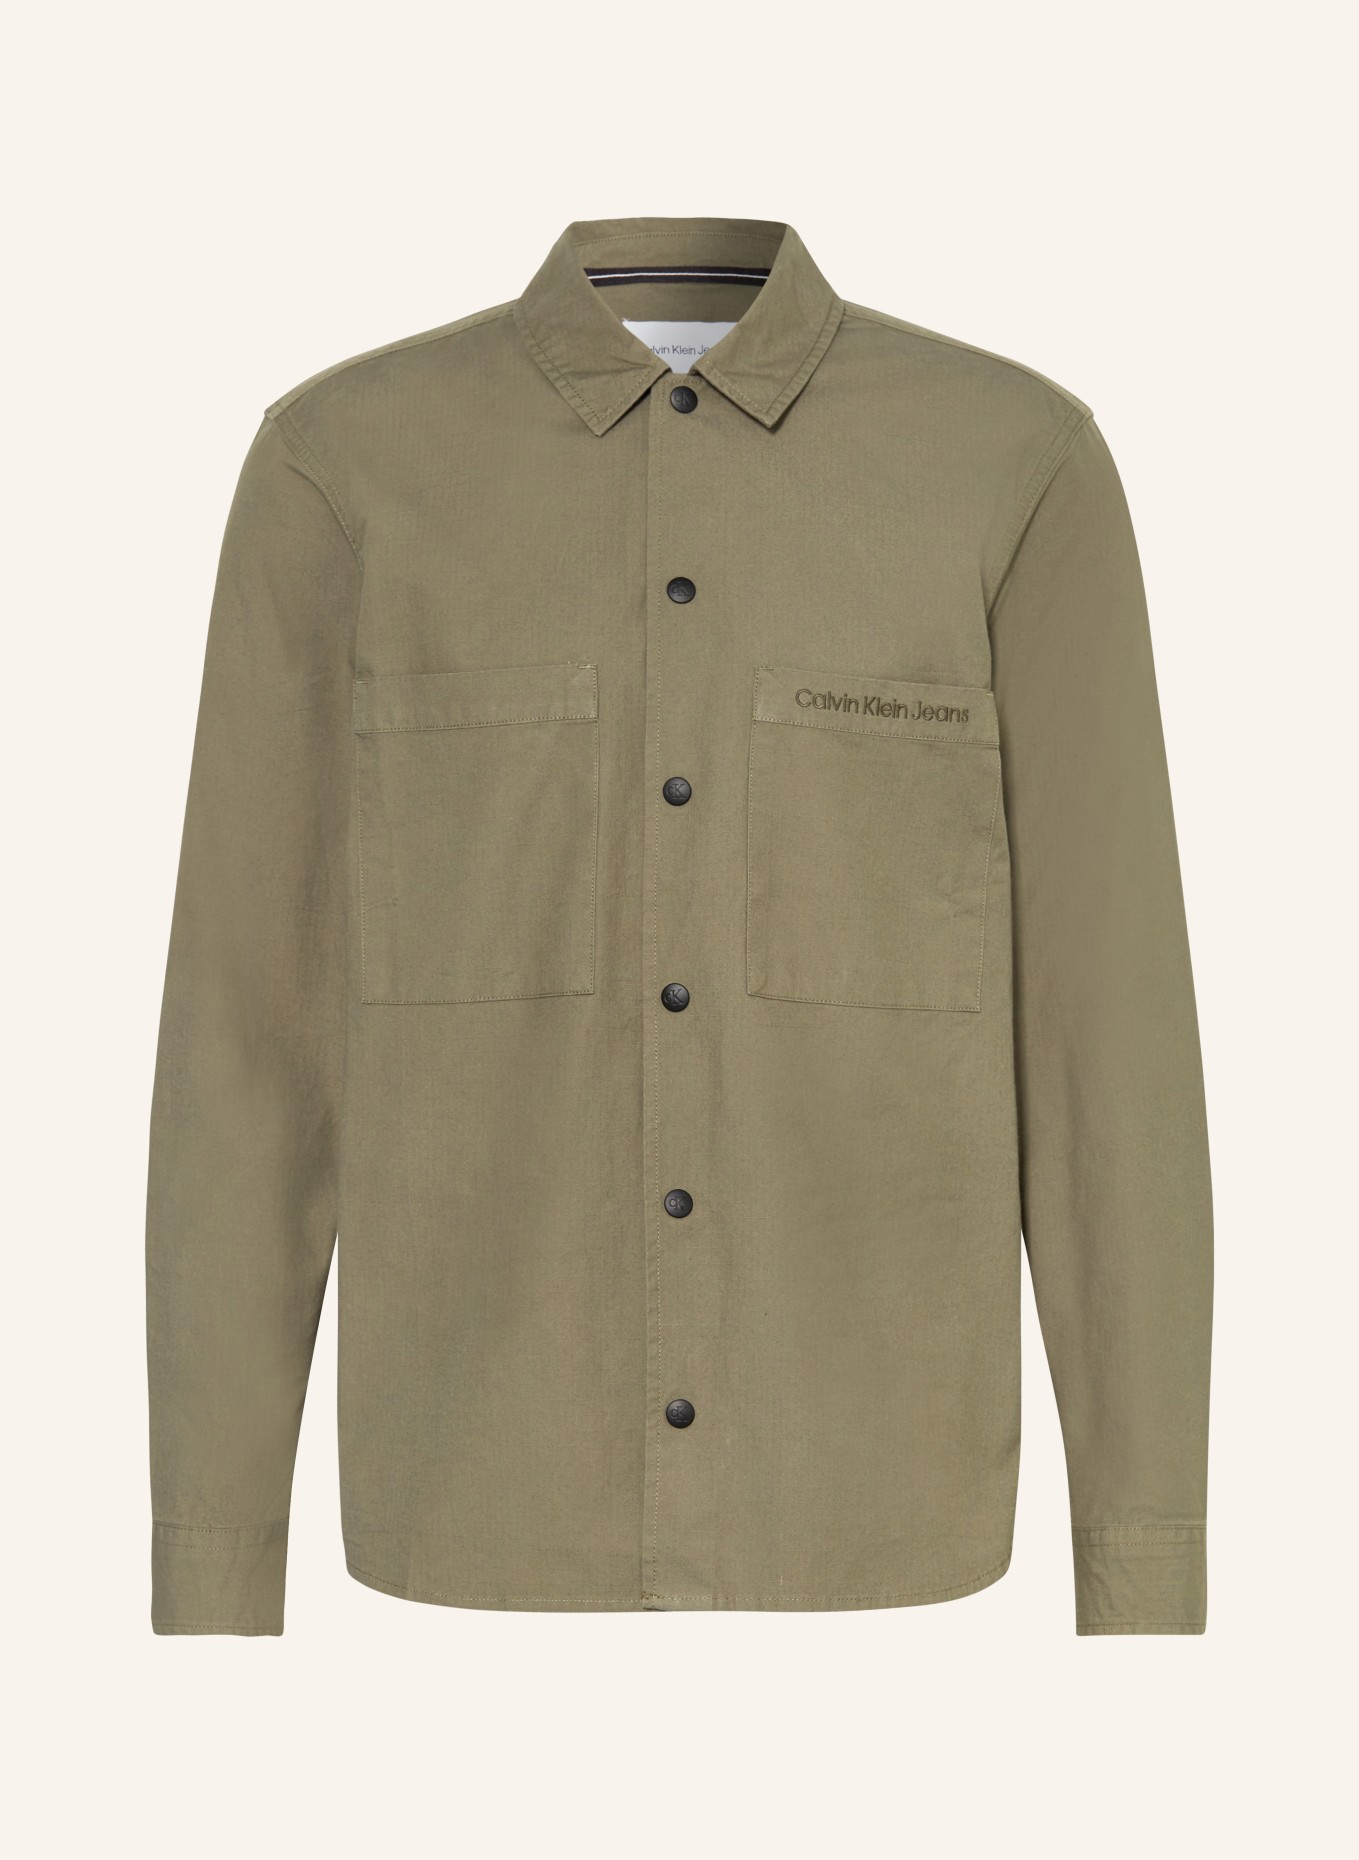 Calvin Klein Jeans Shirt relaxed fit, Color: OLIVE (Image 1)